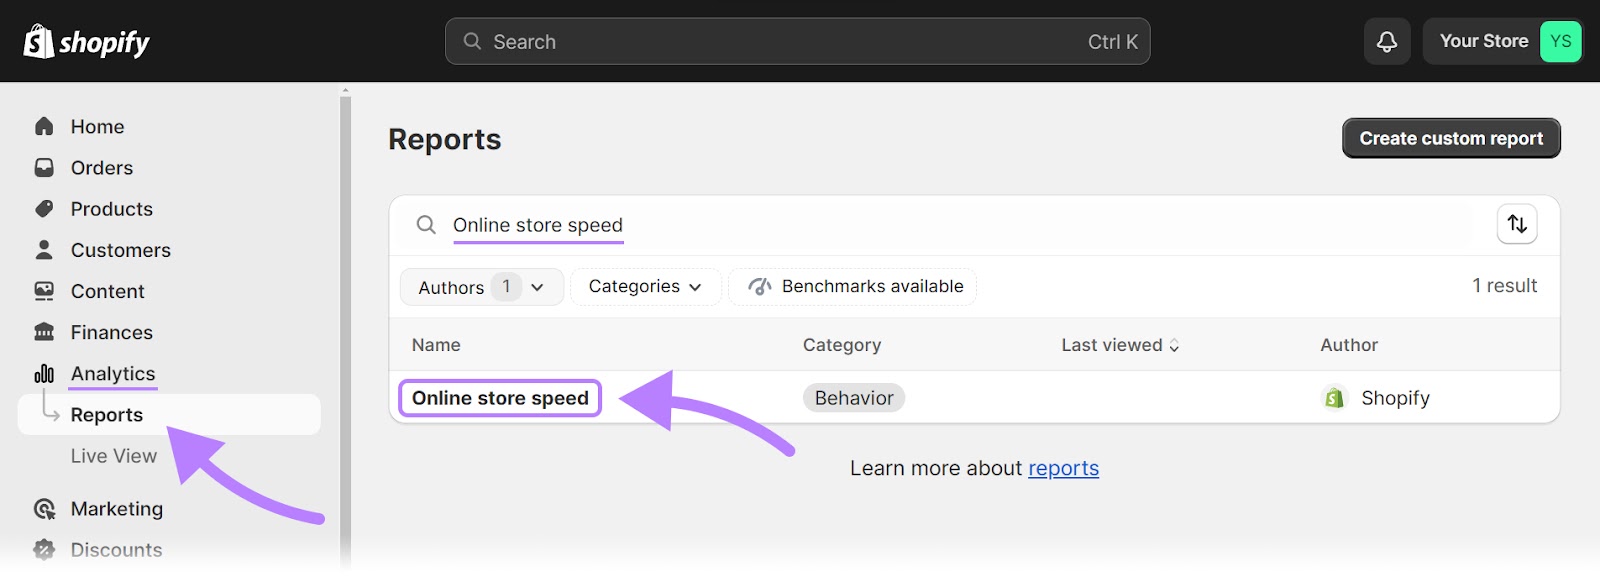 “Online store speed" selected under Shopify Reports page